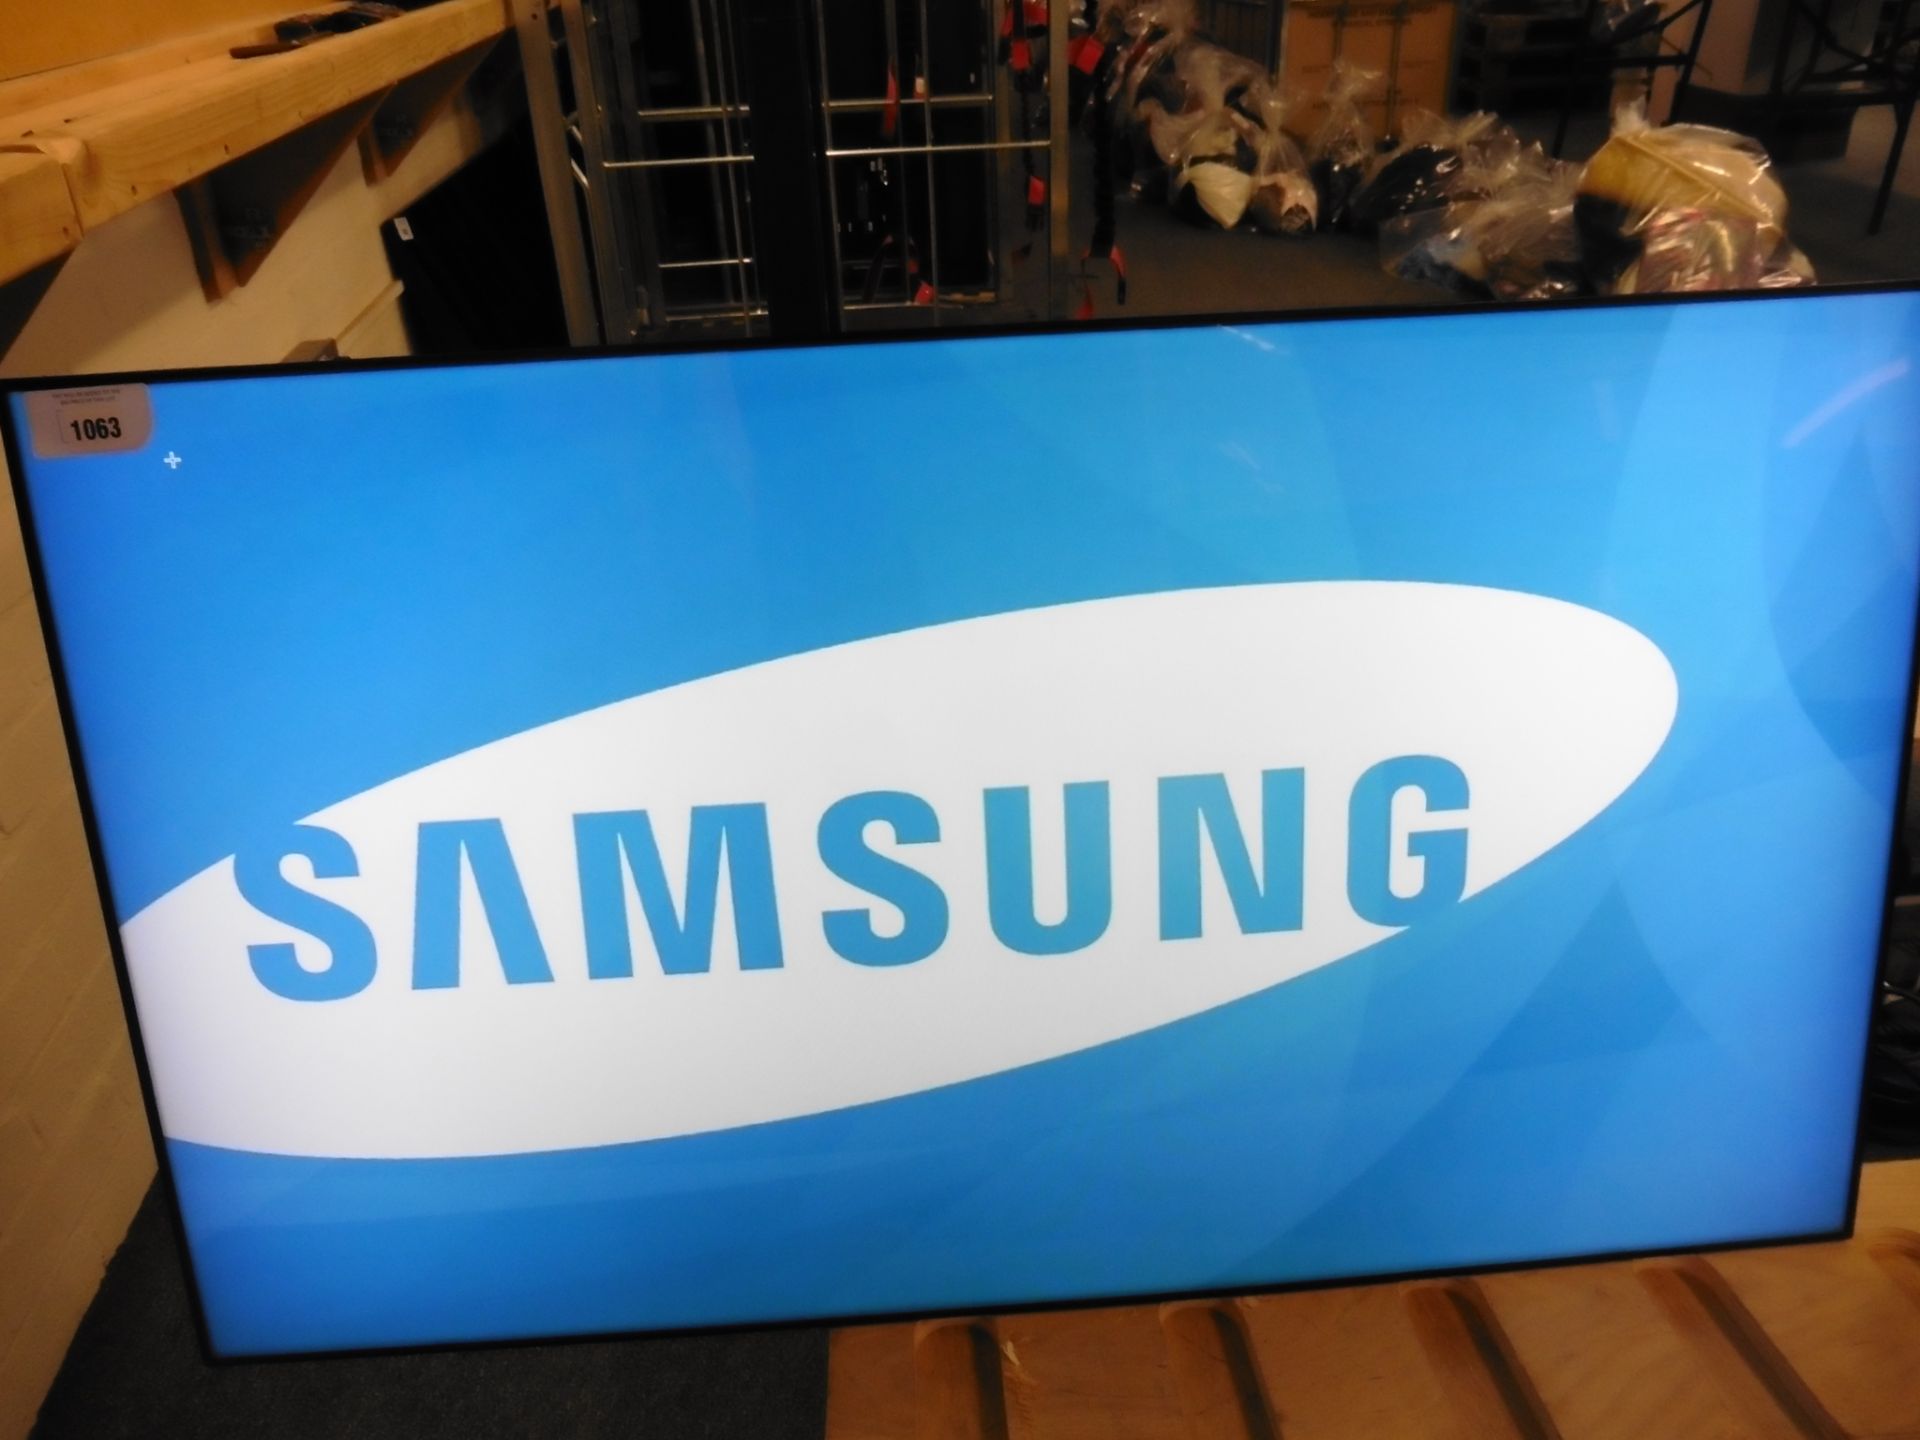 Samsung model UE46C colour display screen with remote (manufactured 2014)